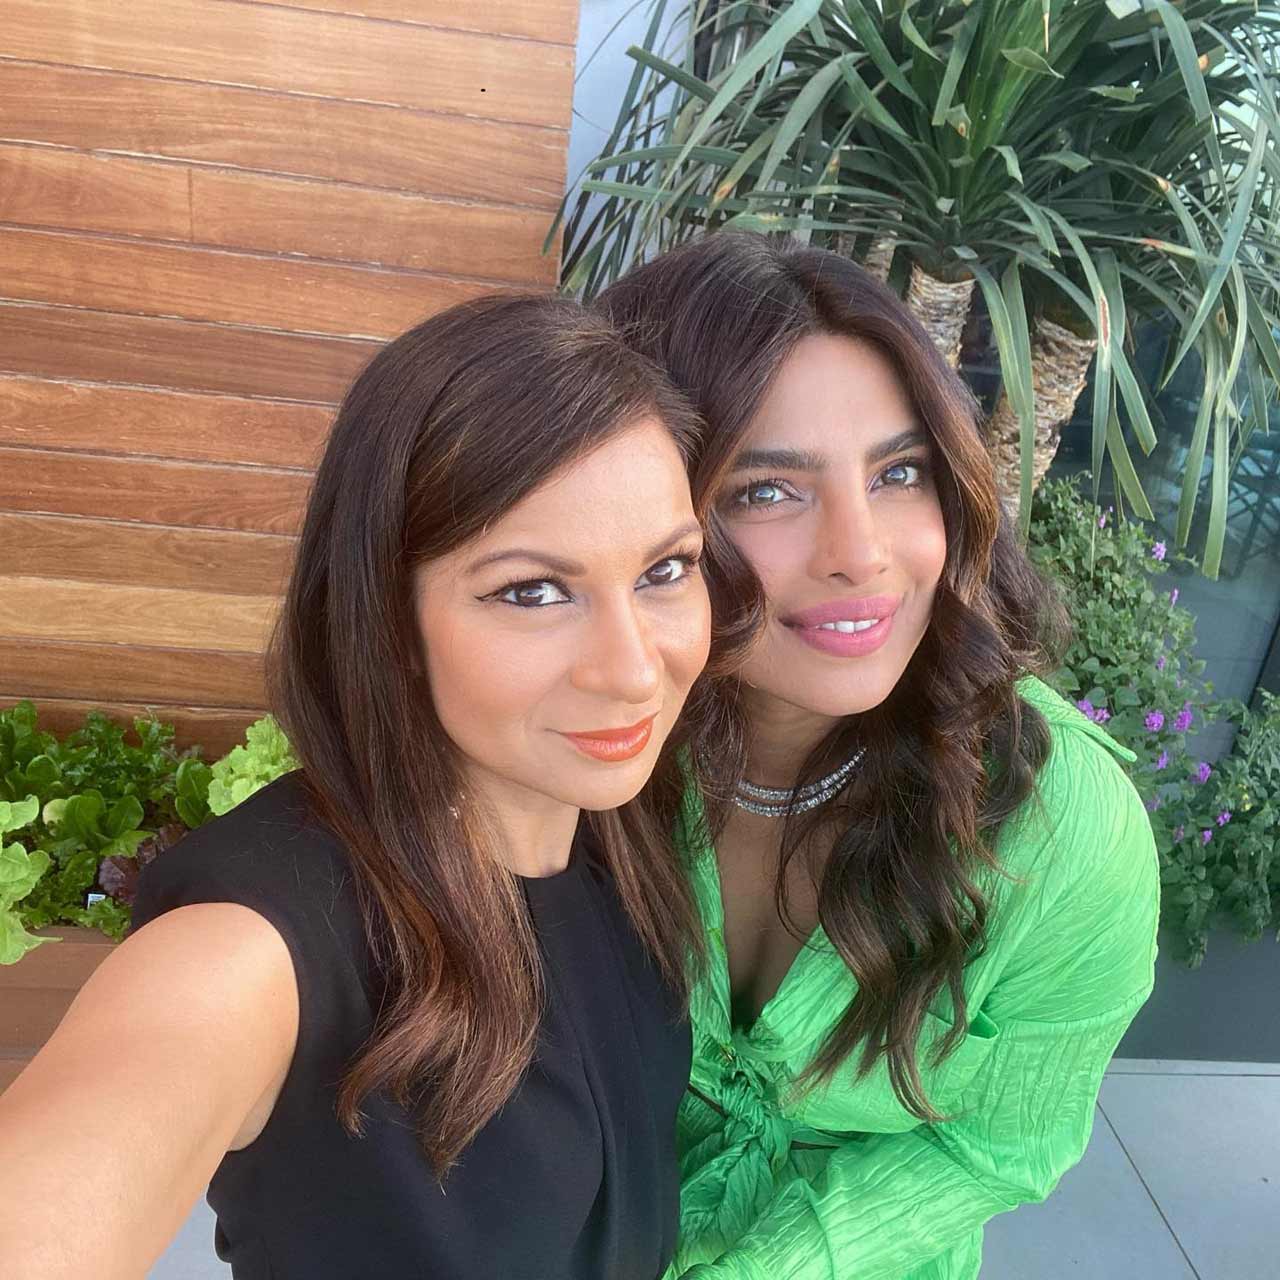 Priyanka Chopra donned a neon green outfit, and we can't get our eyes off the beauty.